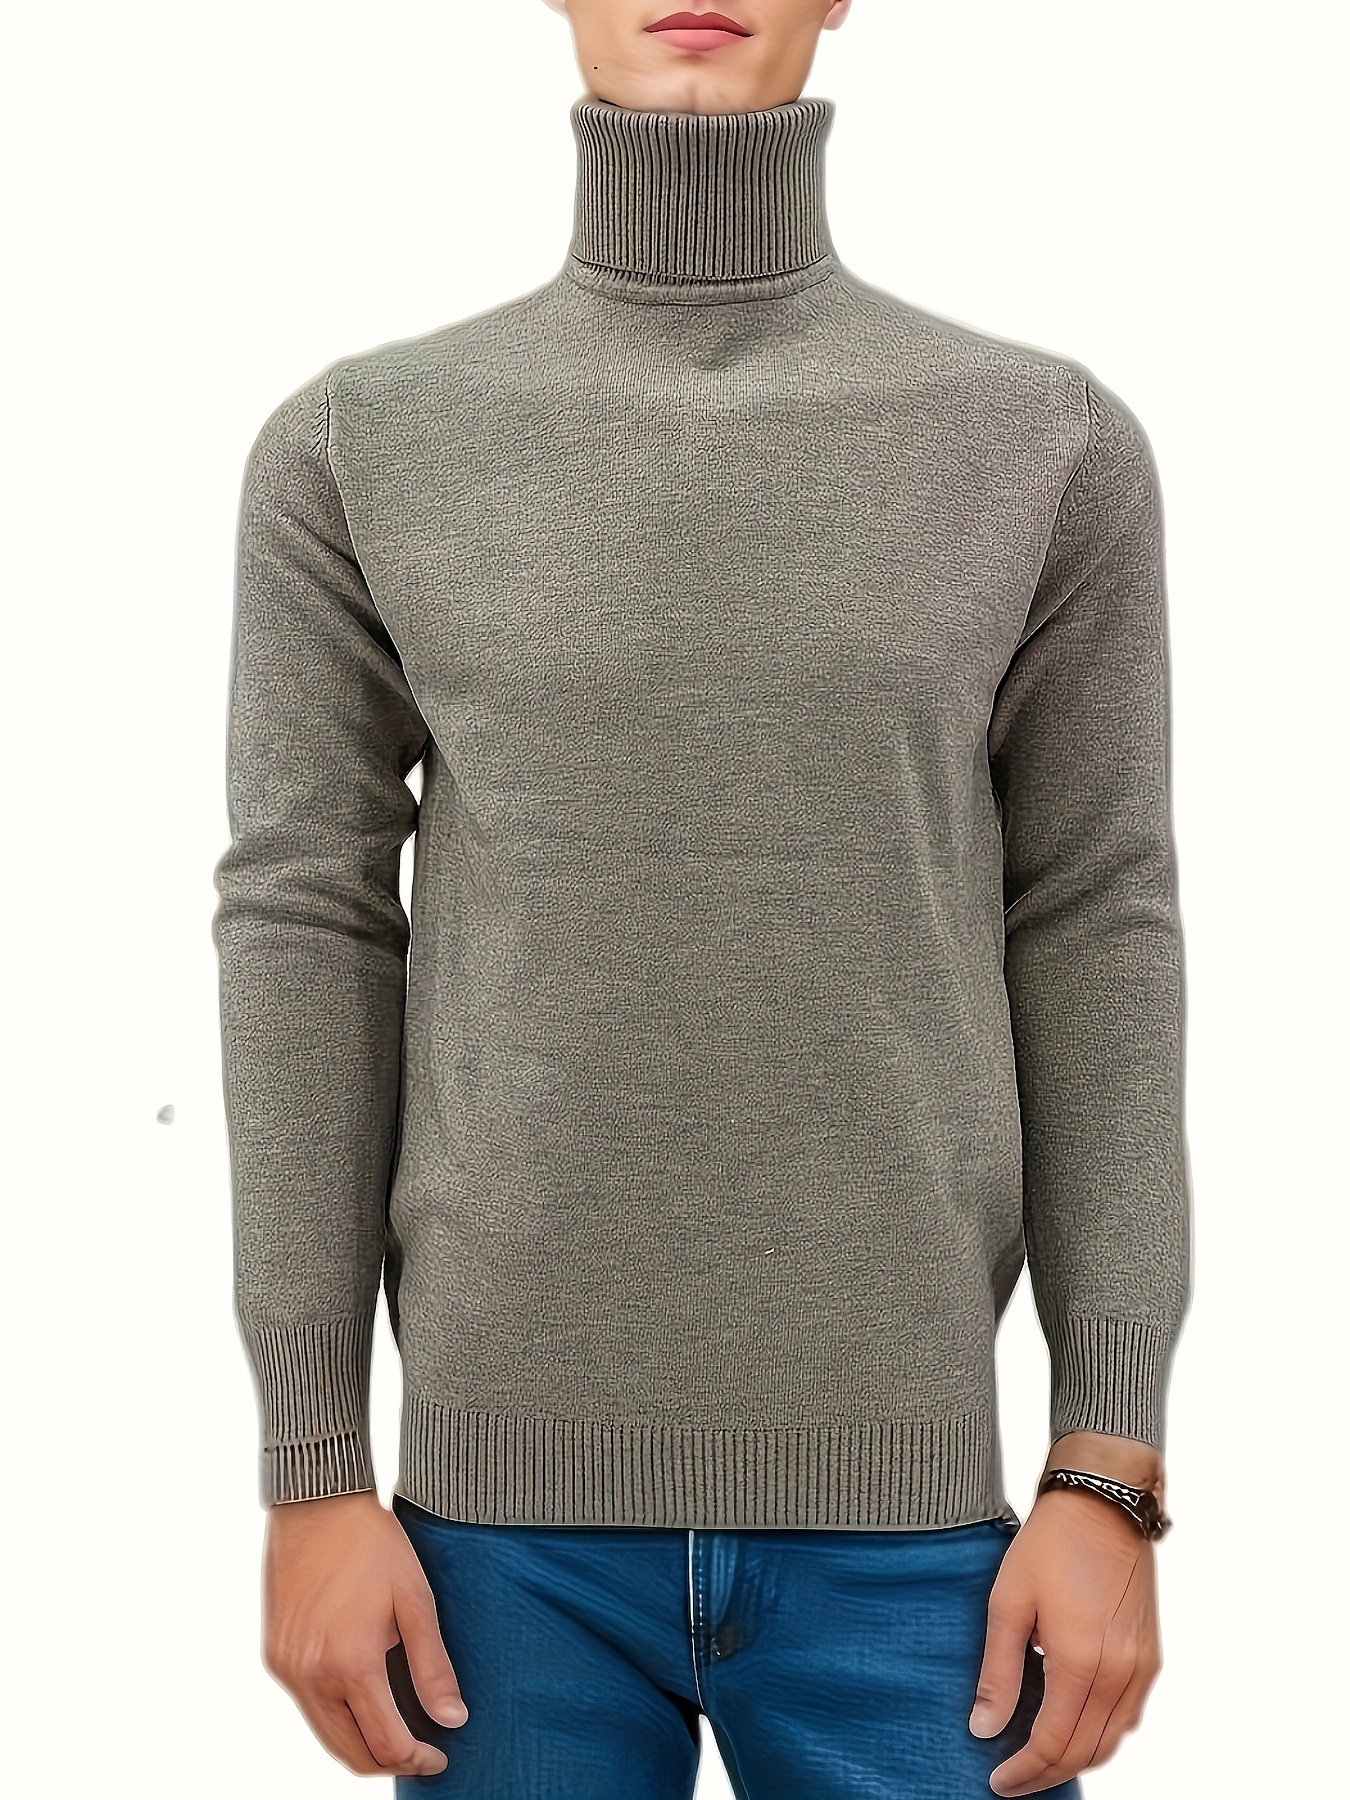 Retro Turtle Neck Knitted Slim Sweater, Men's Casual Warm Slightly Stretch  Pullover Sweater For Fall Winter